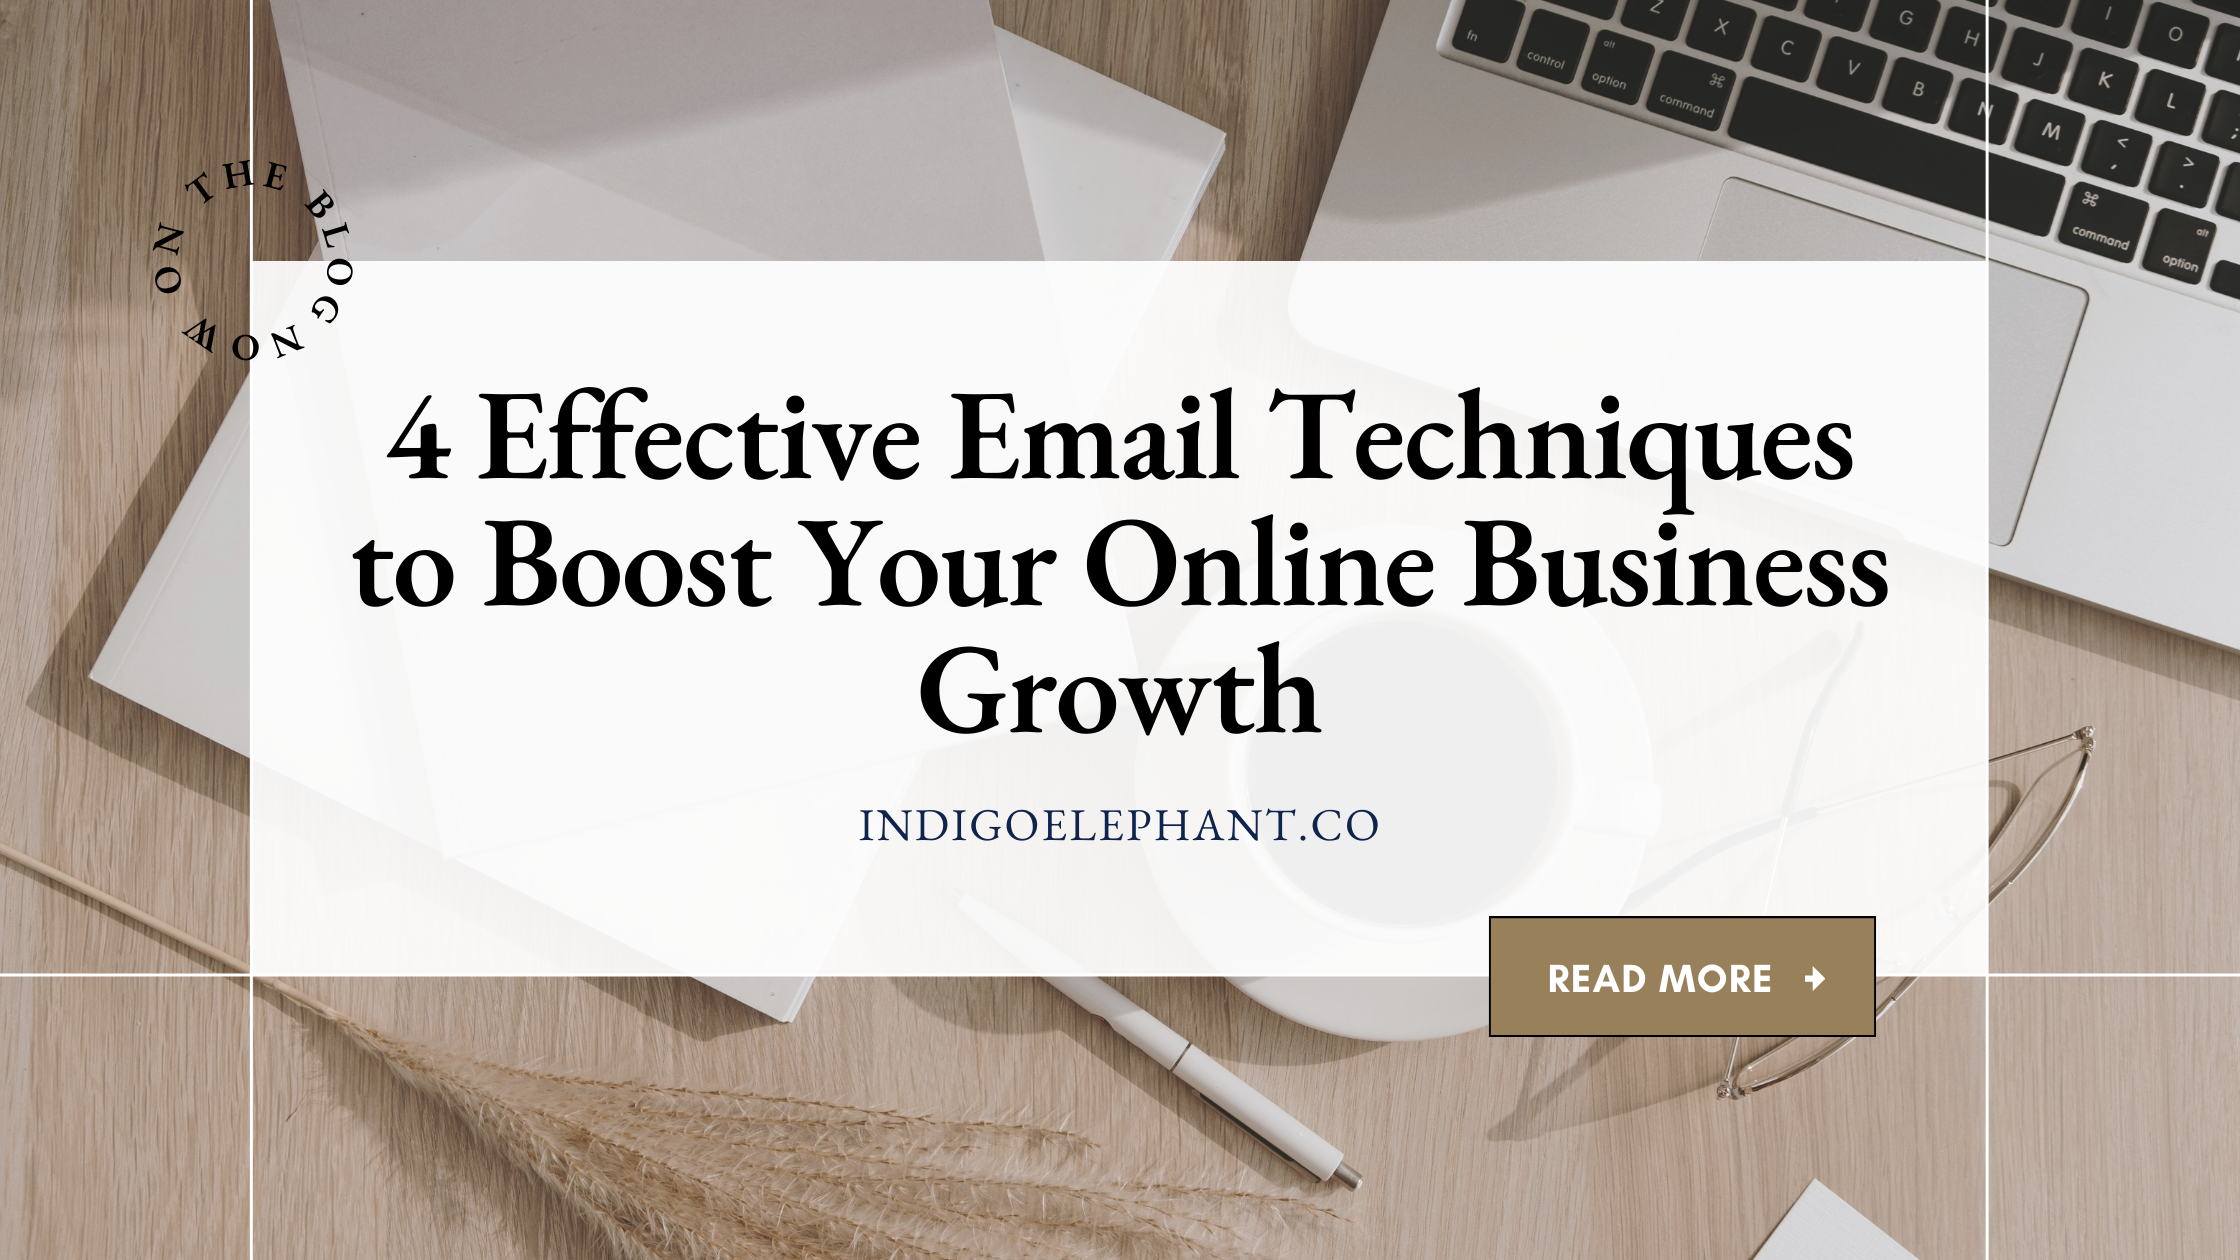 4 Effective Email Techniques to Boost Your Online Business Growth